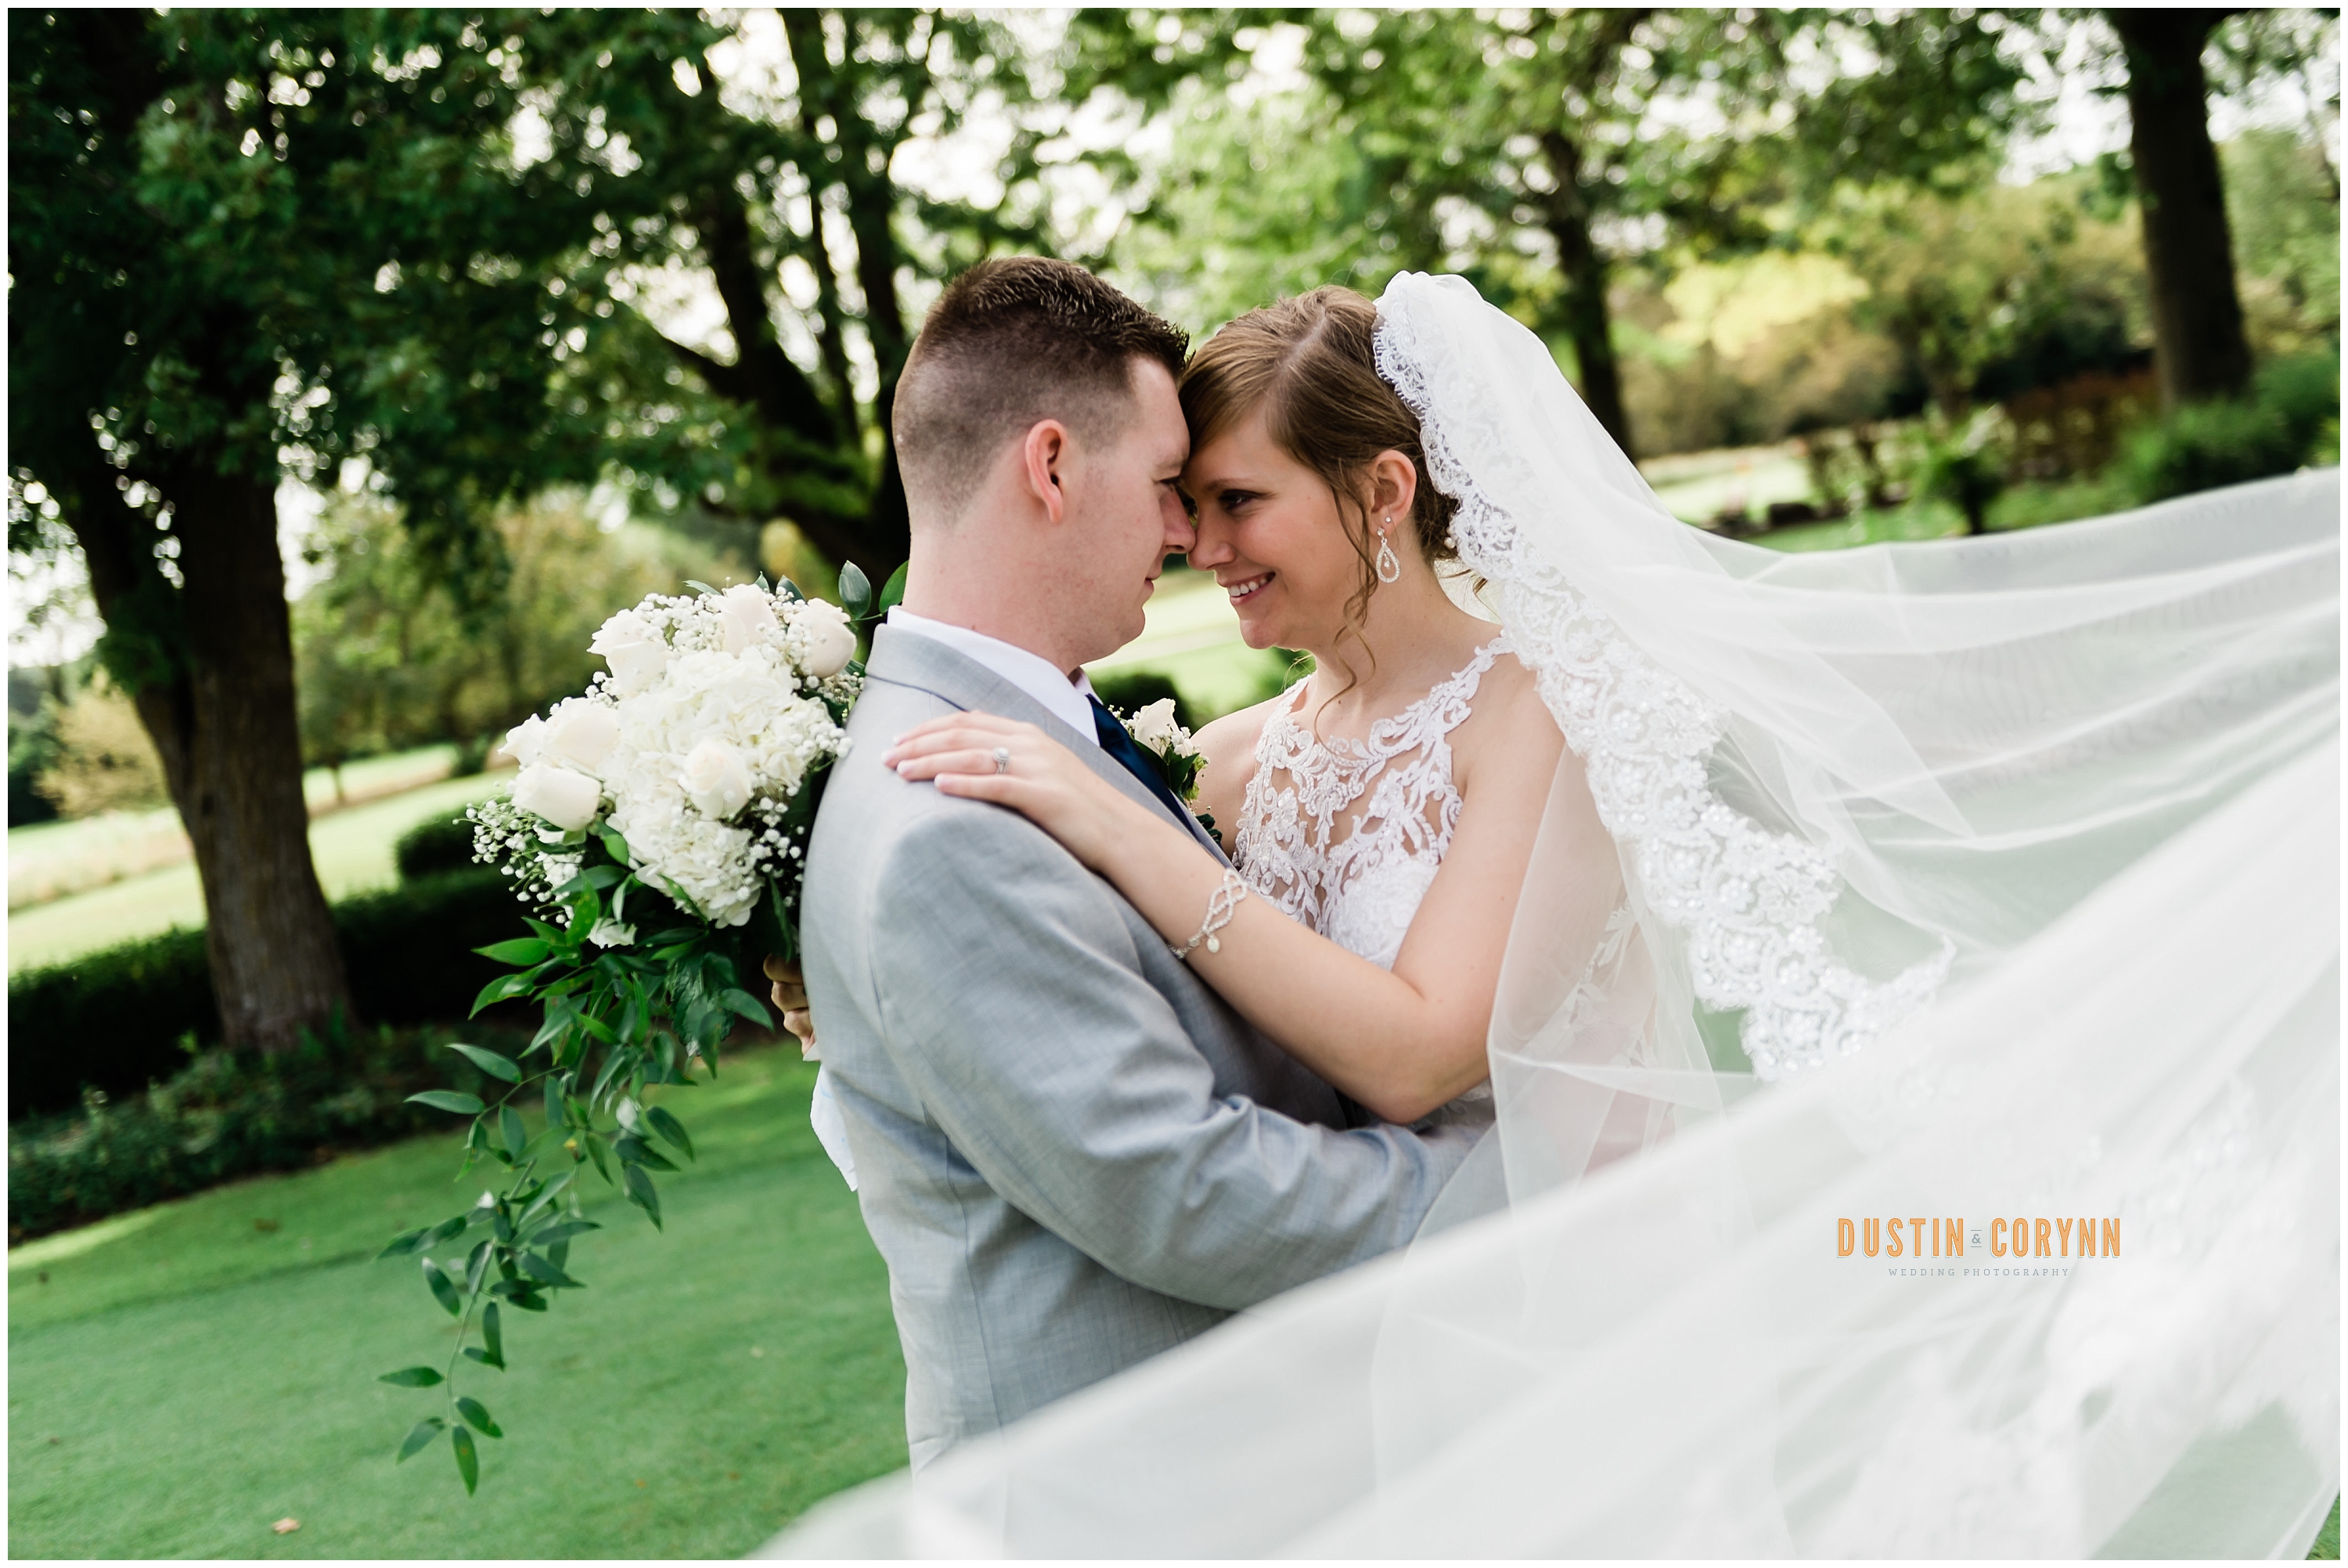 Veil Portrait at Decorations at Orchard Ridge Country Club Wedding